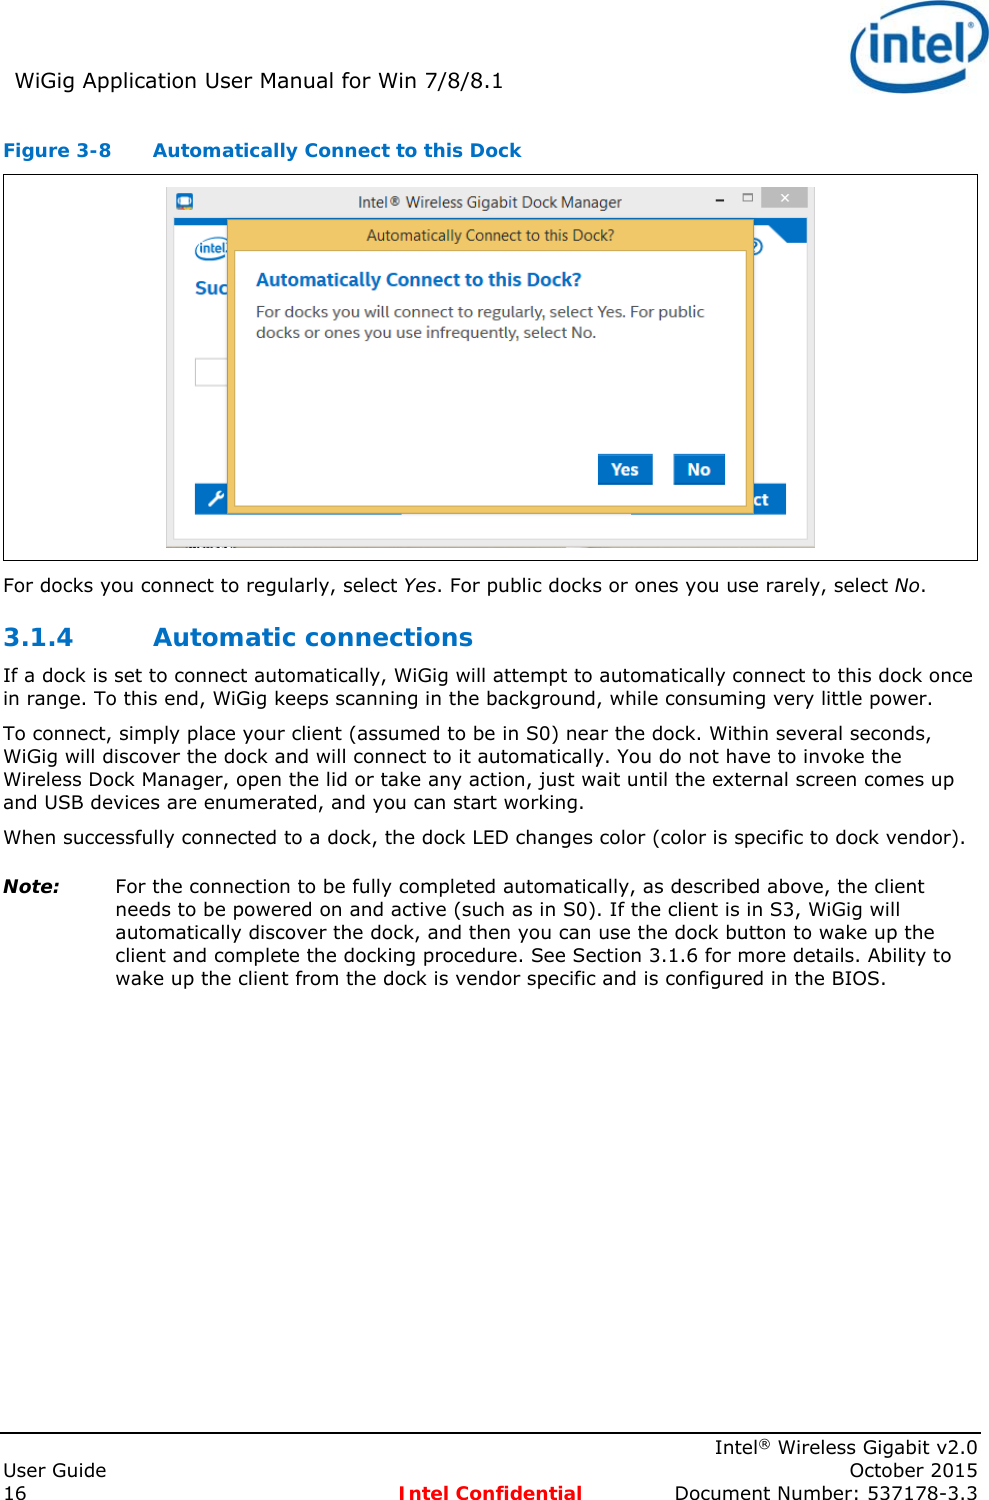 WiGig Application User Manual for Win 7/8/8.1      Intel® Wireless Gigabit v2.0 User Guide    October 2015 16 Intel Confidential  Document Number: 537178-3.3 Figure 3-8  Automatically Connect to this Dock  For docks you connect to regularly, select Yes. For public docks or ones you use rarely, select No.  3.1.4 Automatic connections If a dock is set to connect automatically, WiGig will attempt to automatically connect to this dock once in range. To this end, WiGig keeps scanning in the background, while consuming very little power. To connect, simply place your client (assumed to be in S0) near the dock. Within several seconds, WiGig will discover the dock and will connect to it automatically. You do not have to invoke the Wireless Dock Manager, open the lid or take any action, just wait until the external screen comes up and USB devices are enumerated, and you can start working. When successfully connected to a dock, the dock LED changes color (color is specific to dock vendor). Note: For the connection to be fully completed automatically, as described above, the client needs to be powered on and active (such as in S0). If the client is in S3, WiGig will automatically discover the dock, and then you can use the dock button to wake up the client and complete the docking procedure. See Section 3.1.6 for more details. Ability to wake up the client from the dock is vendor specific and is configured in the BIOS. 